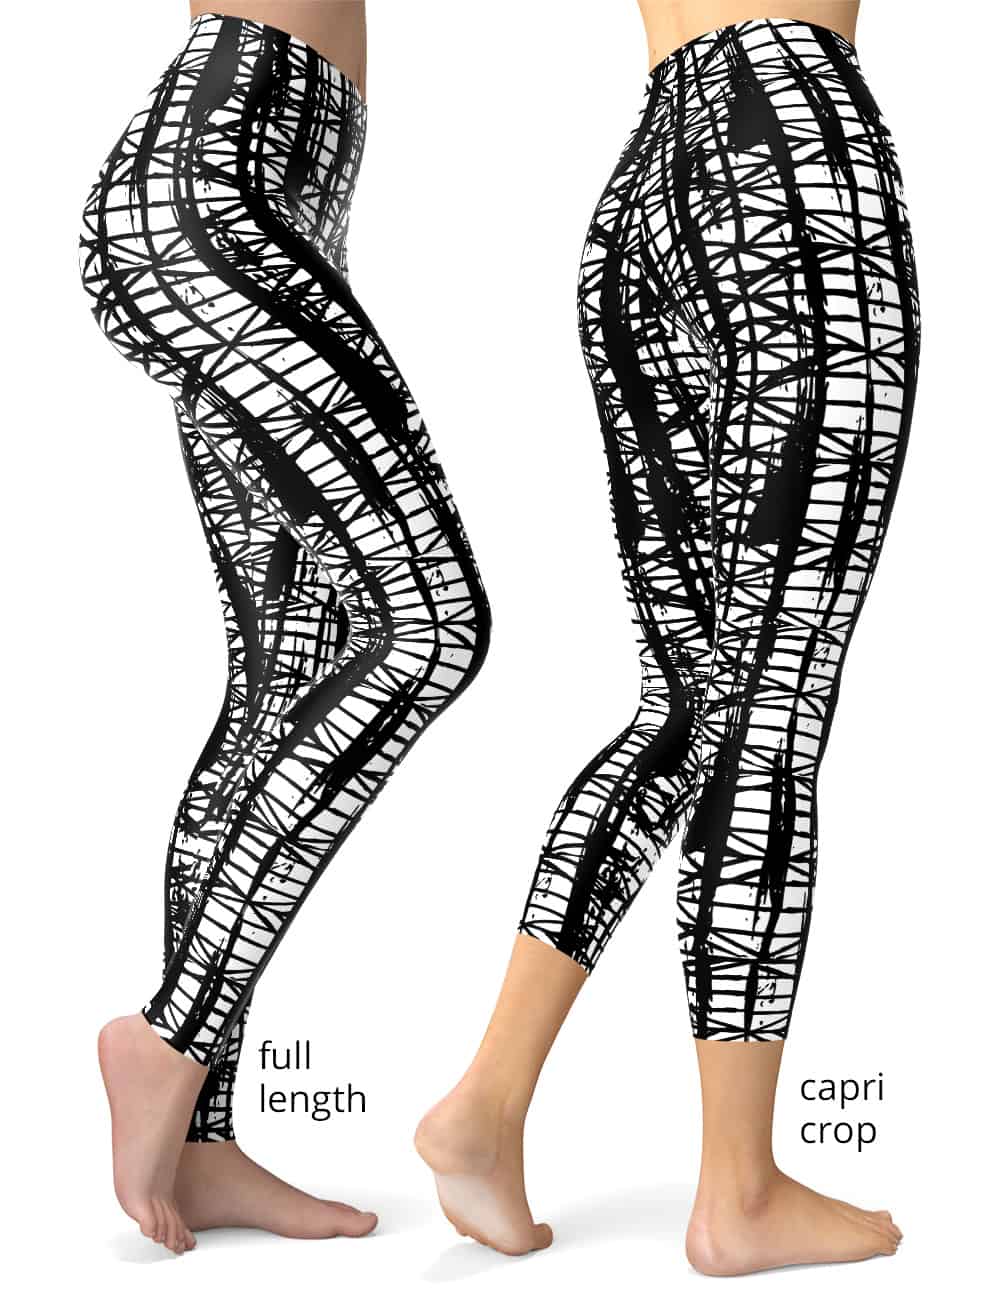 Chemistry Formula & Equation Leggings - Designed By Squeaky Chimp